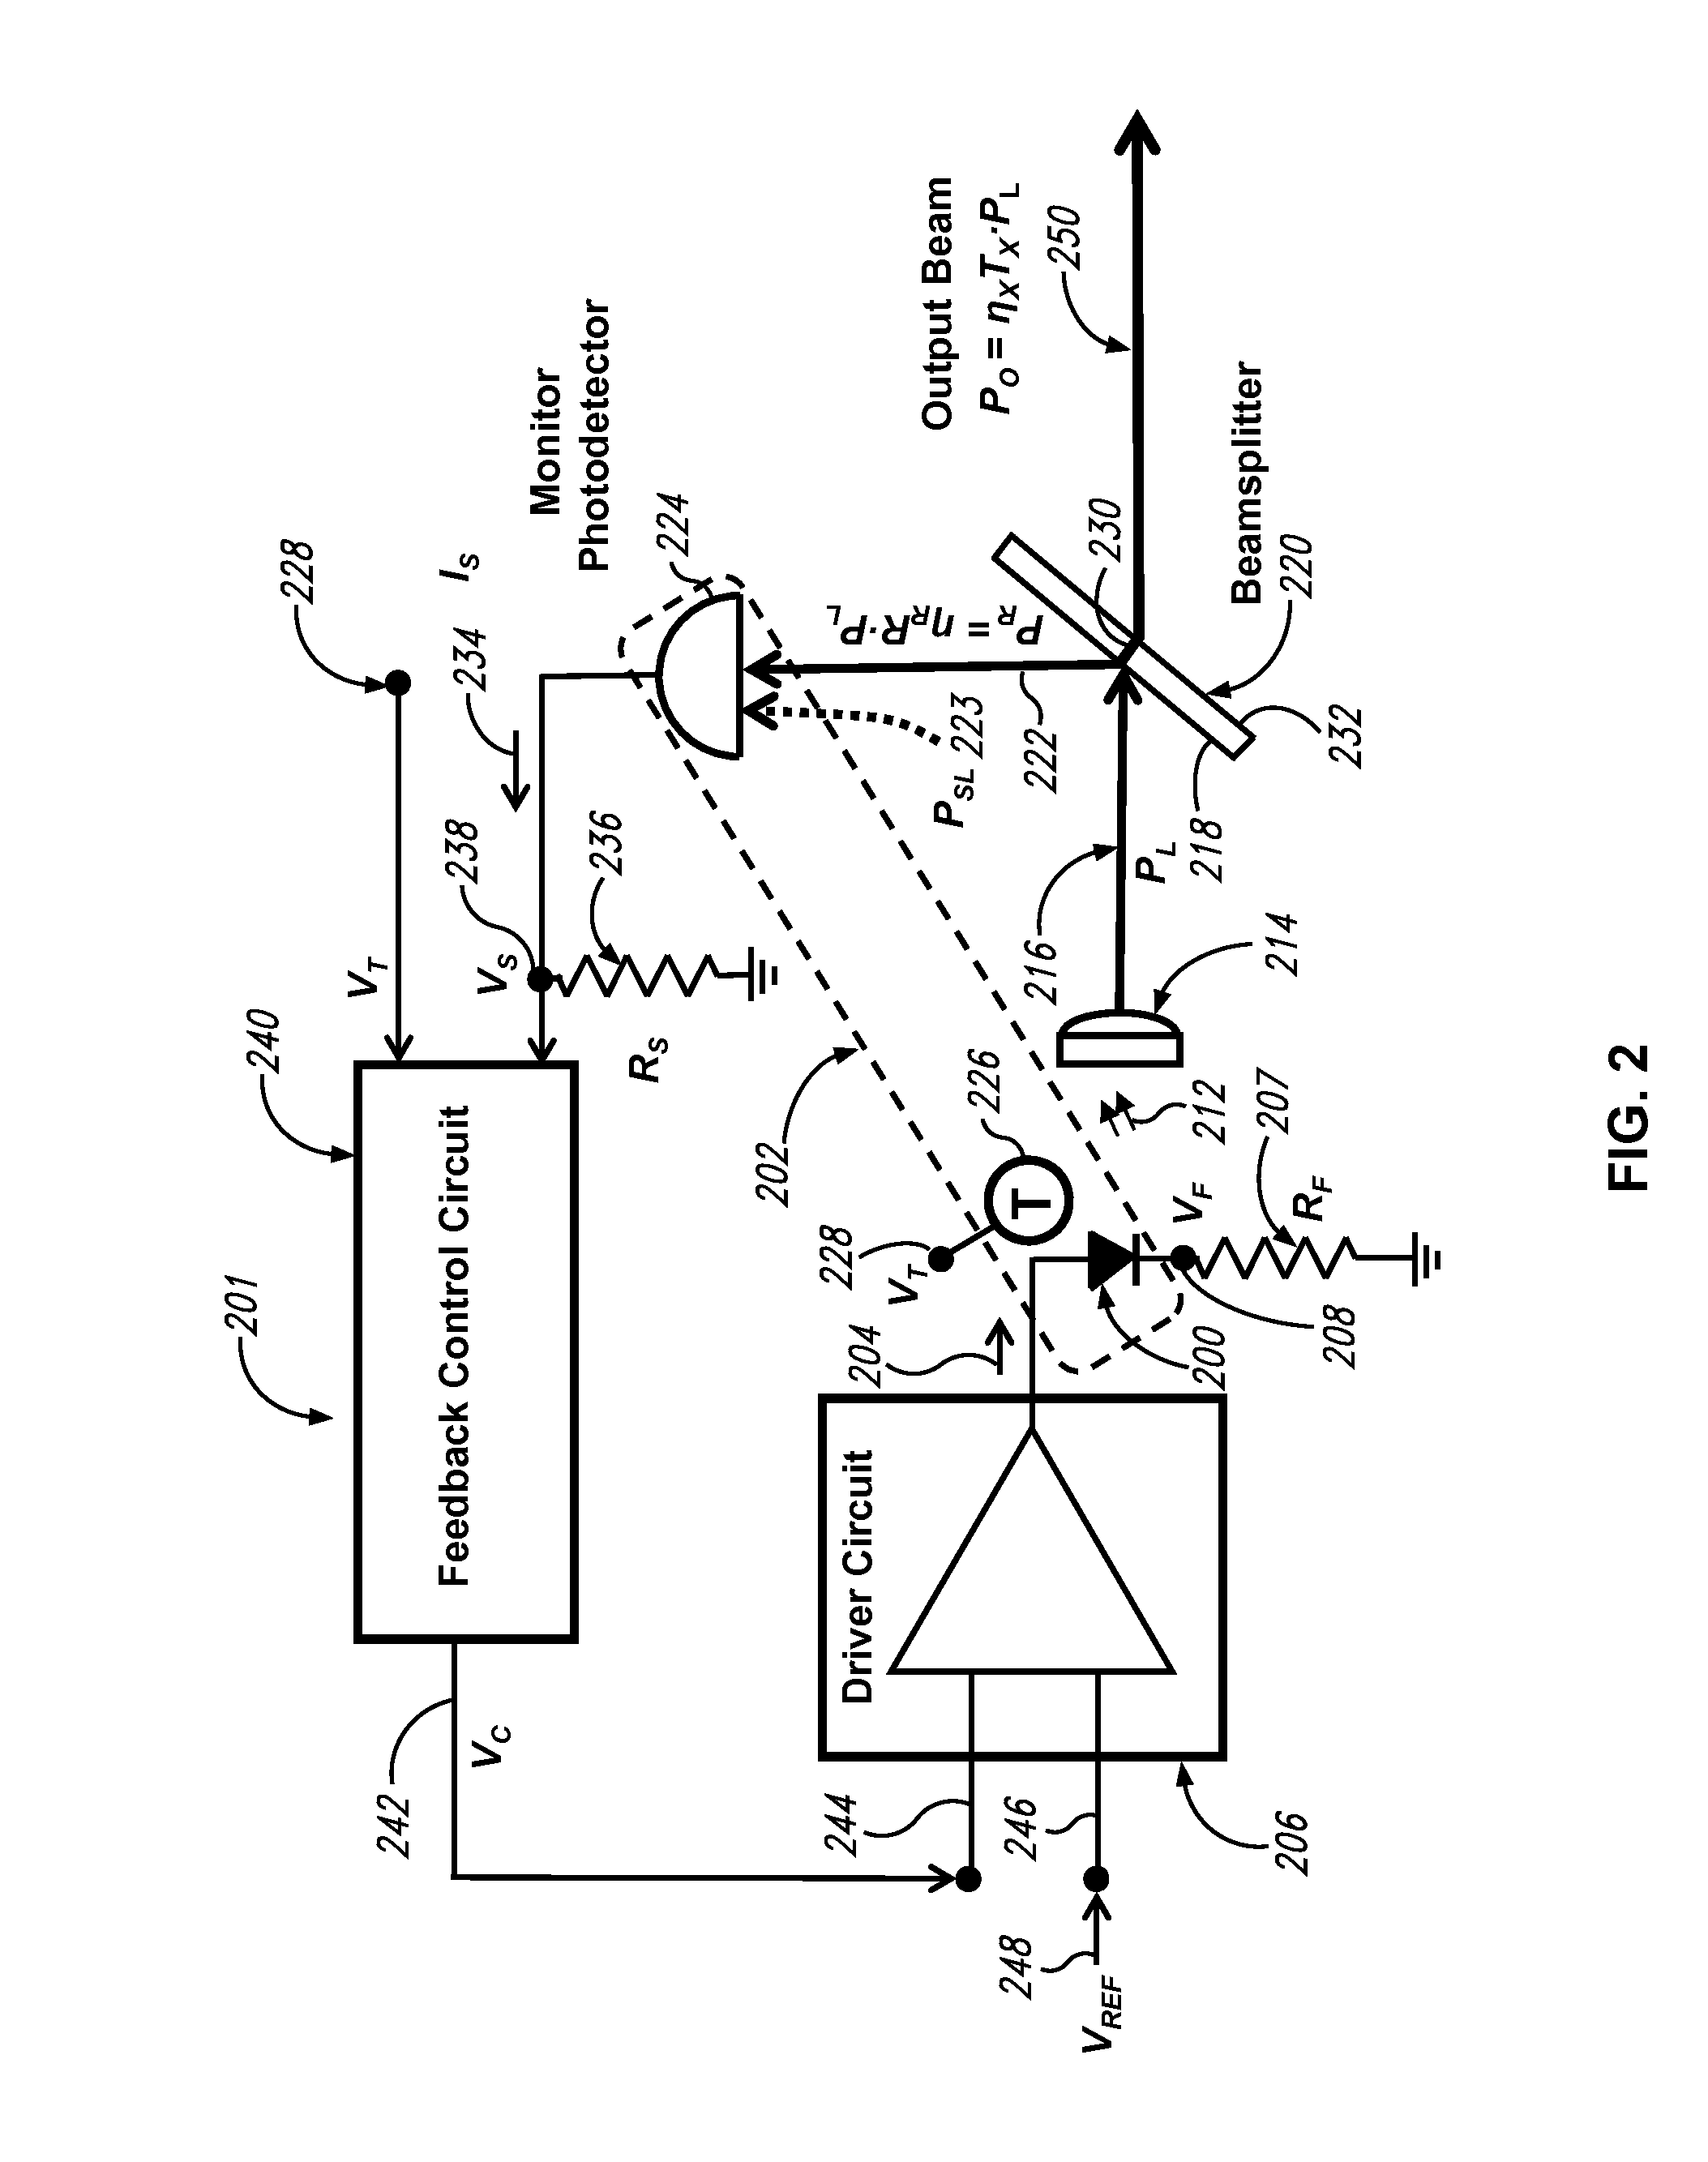 High-stability light source system and method